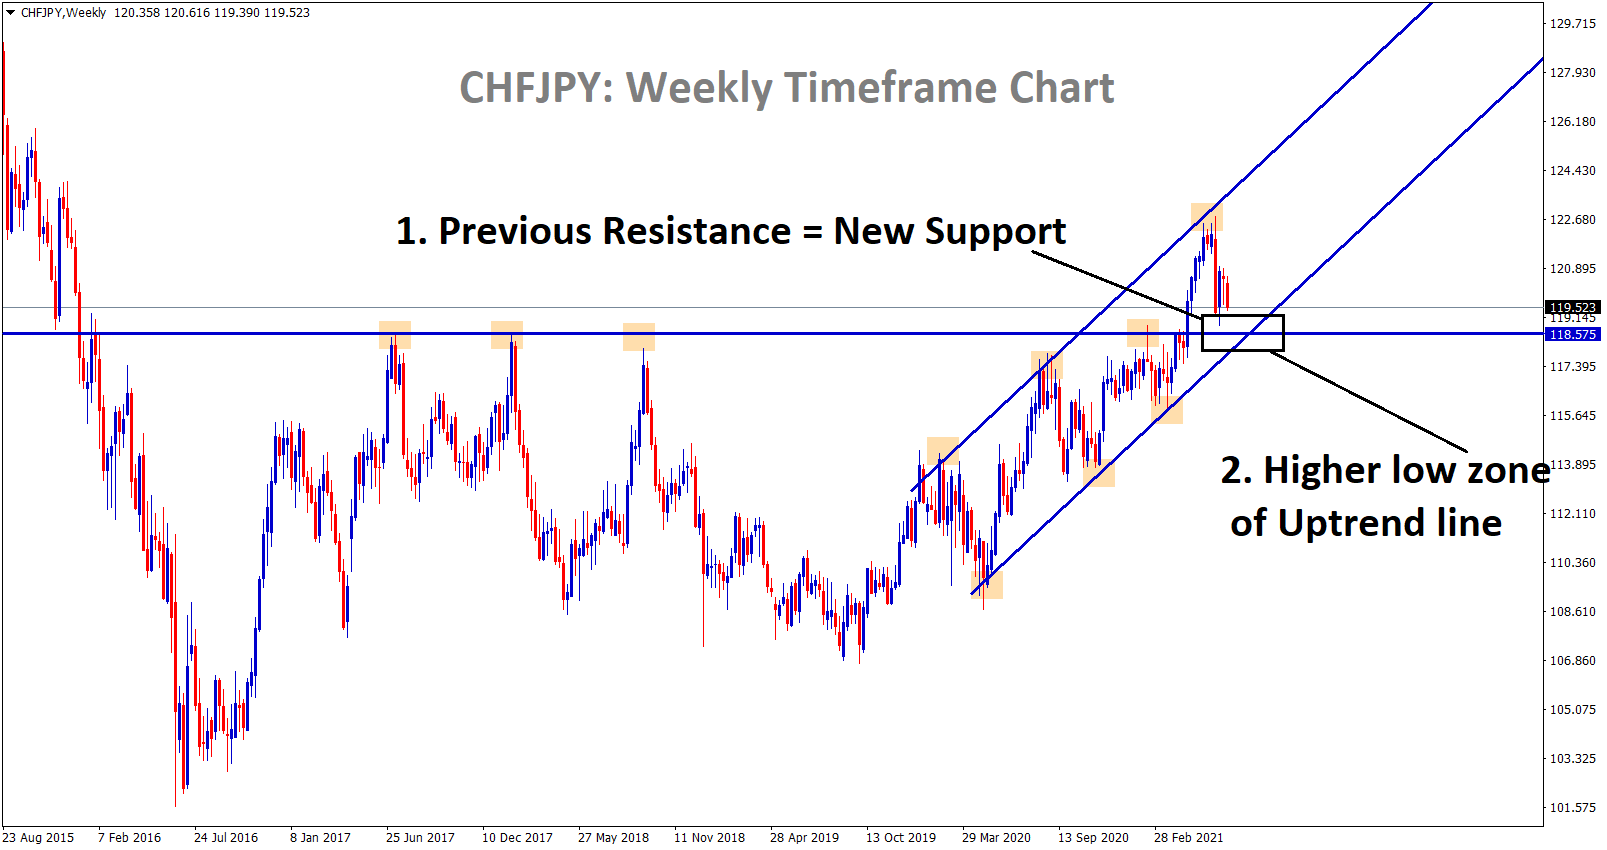 CHFJPY previous resistance 116.5 is acting as a new support and higher low zone of an uptrend line